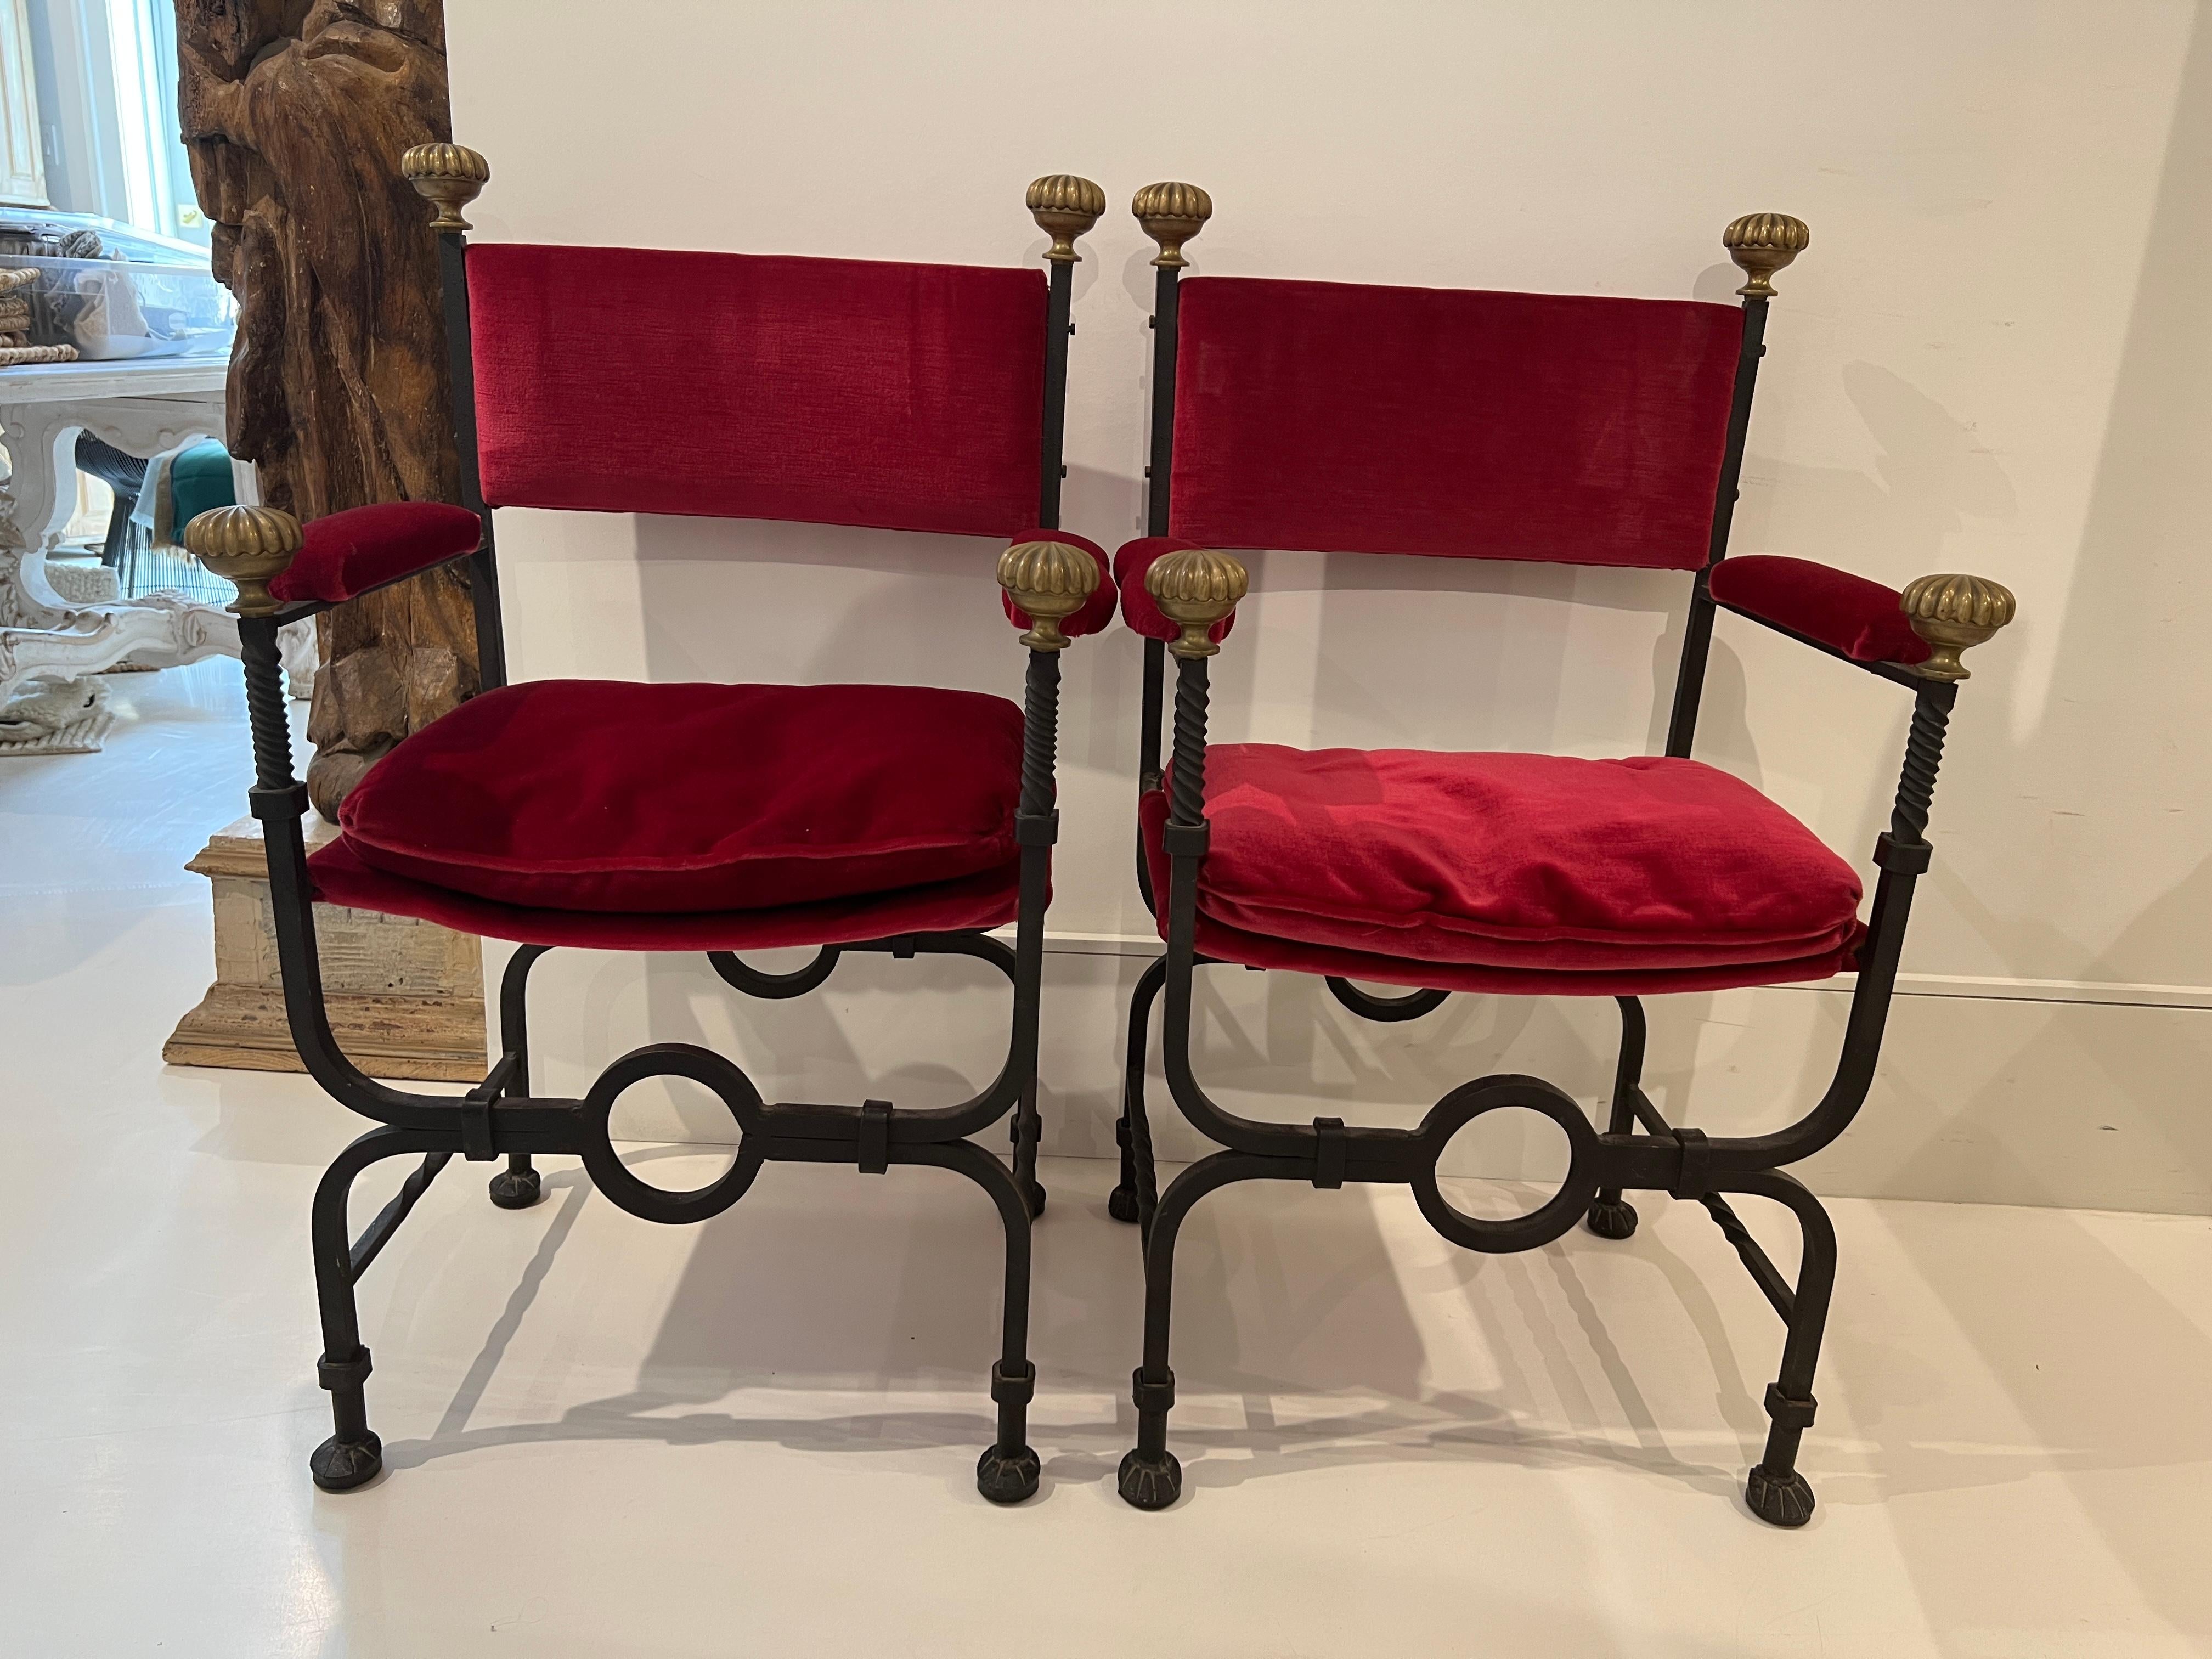 A pair of Savonarola chairs fabricated in heavy iron with brass embellishments. The seats, arms and back are upholstered in lush red velvet.